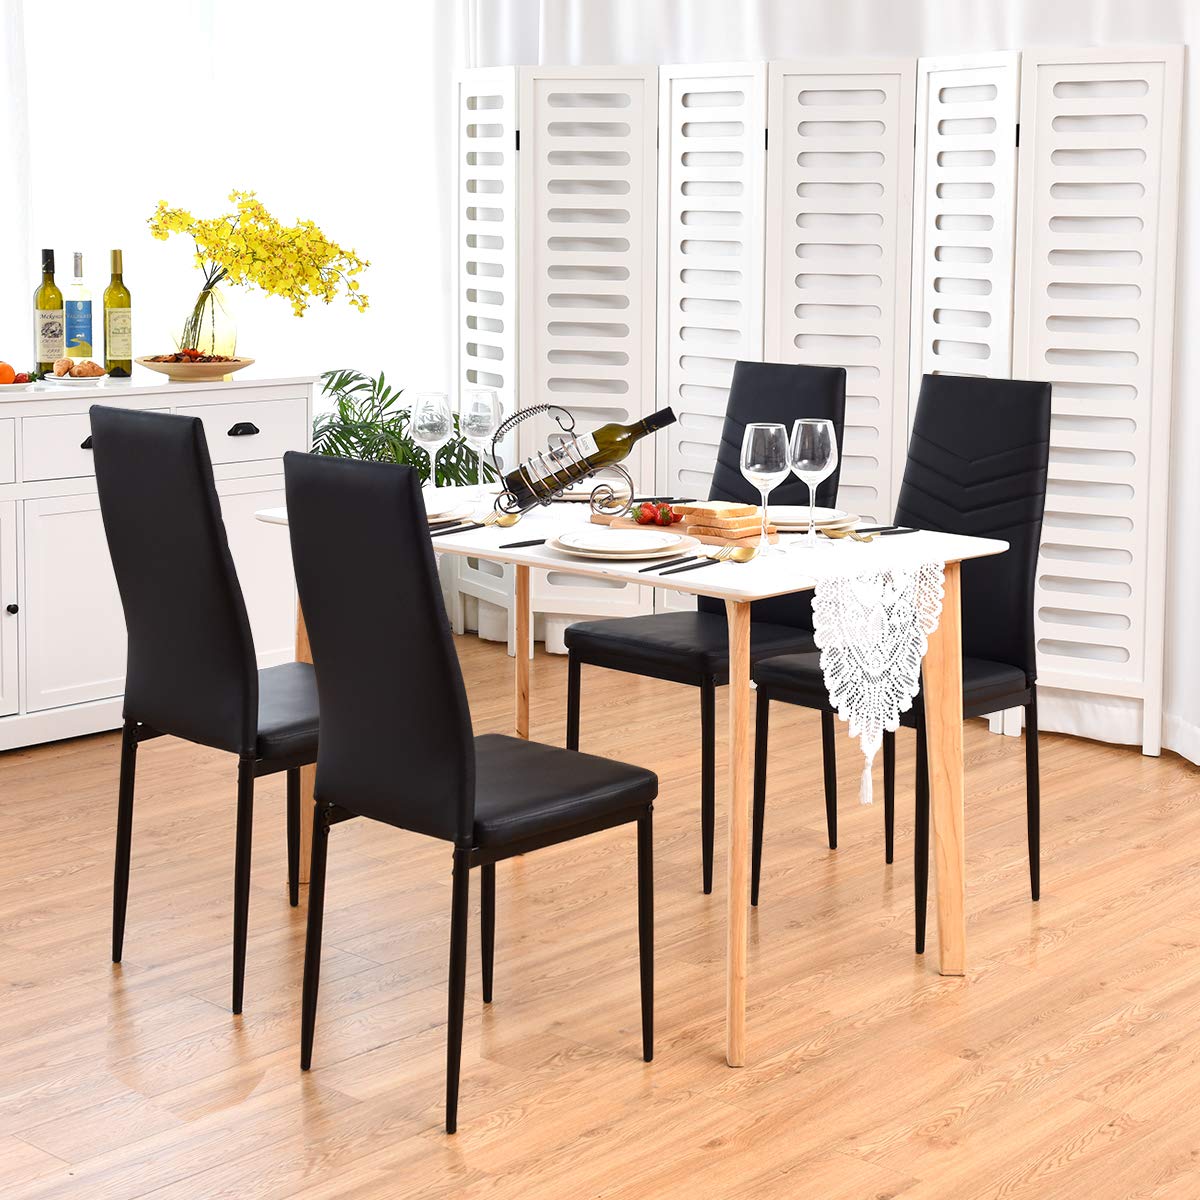 4 Dining Chairs, High Back Dining Side Chairs w/PVC Leather & Non-Slip Feet Pads